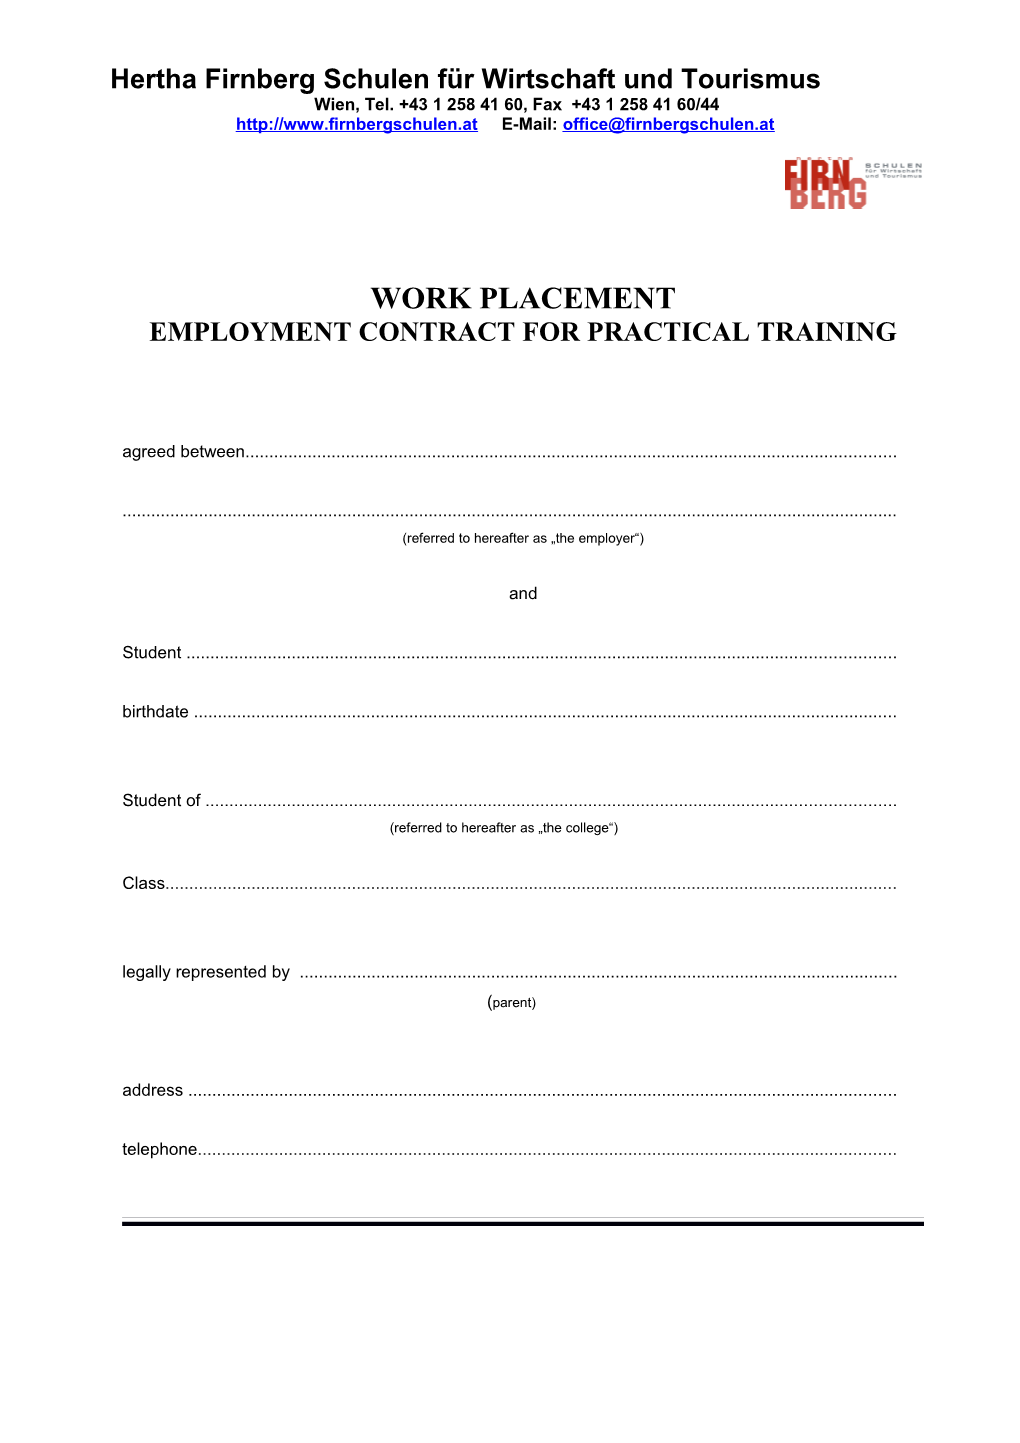 Employment Contract for Practical Training